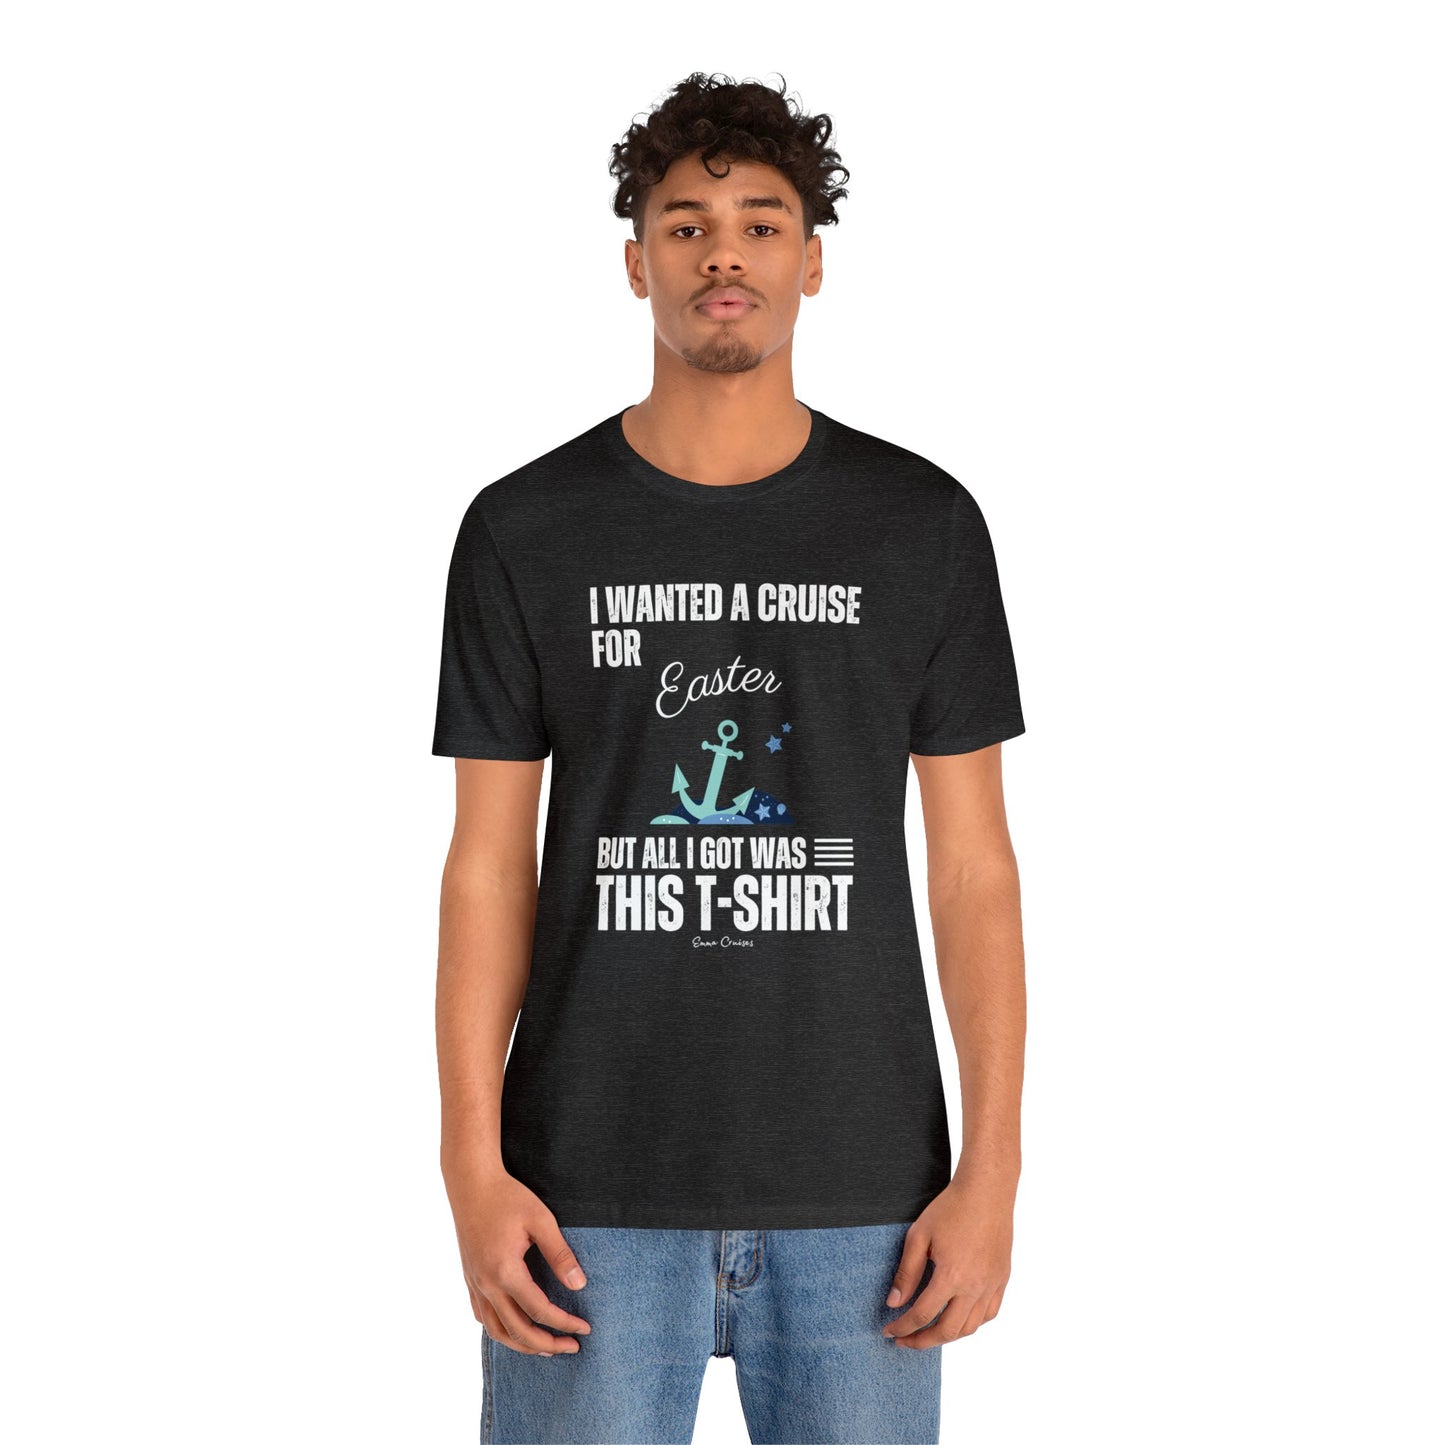 I Wanted a Cruise for Easter - UNISEX T-Shirt